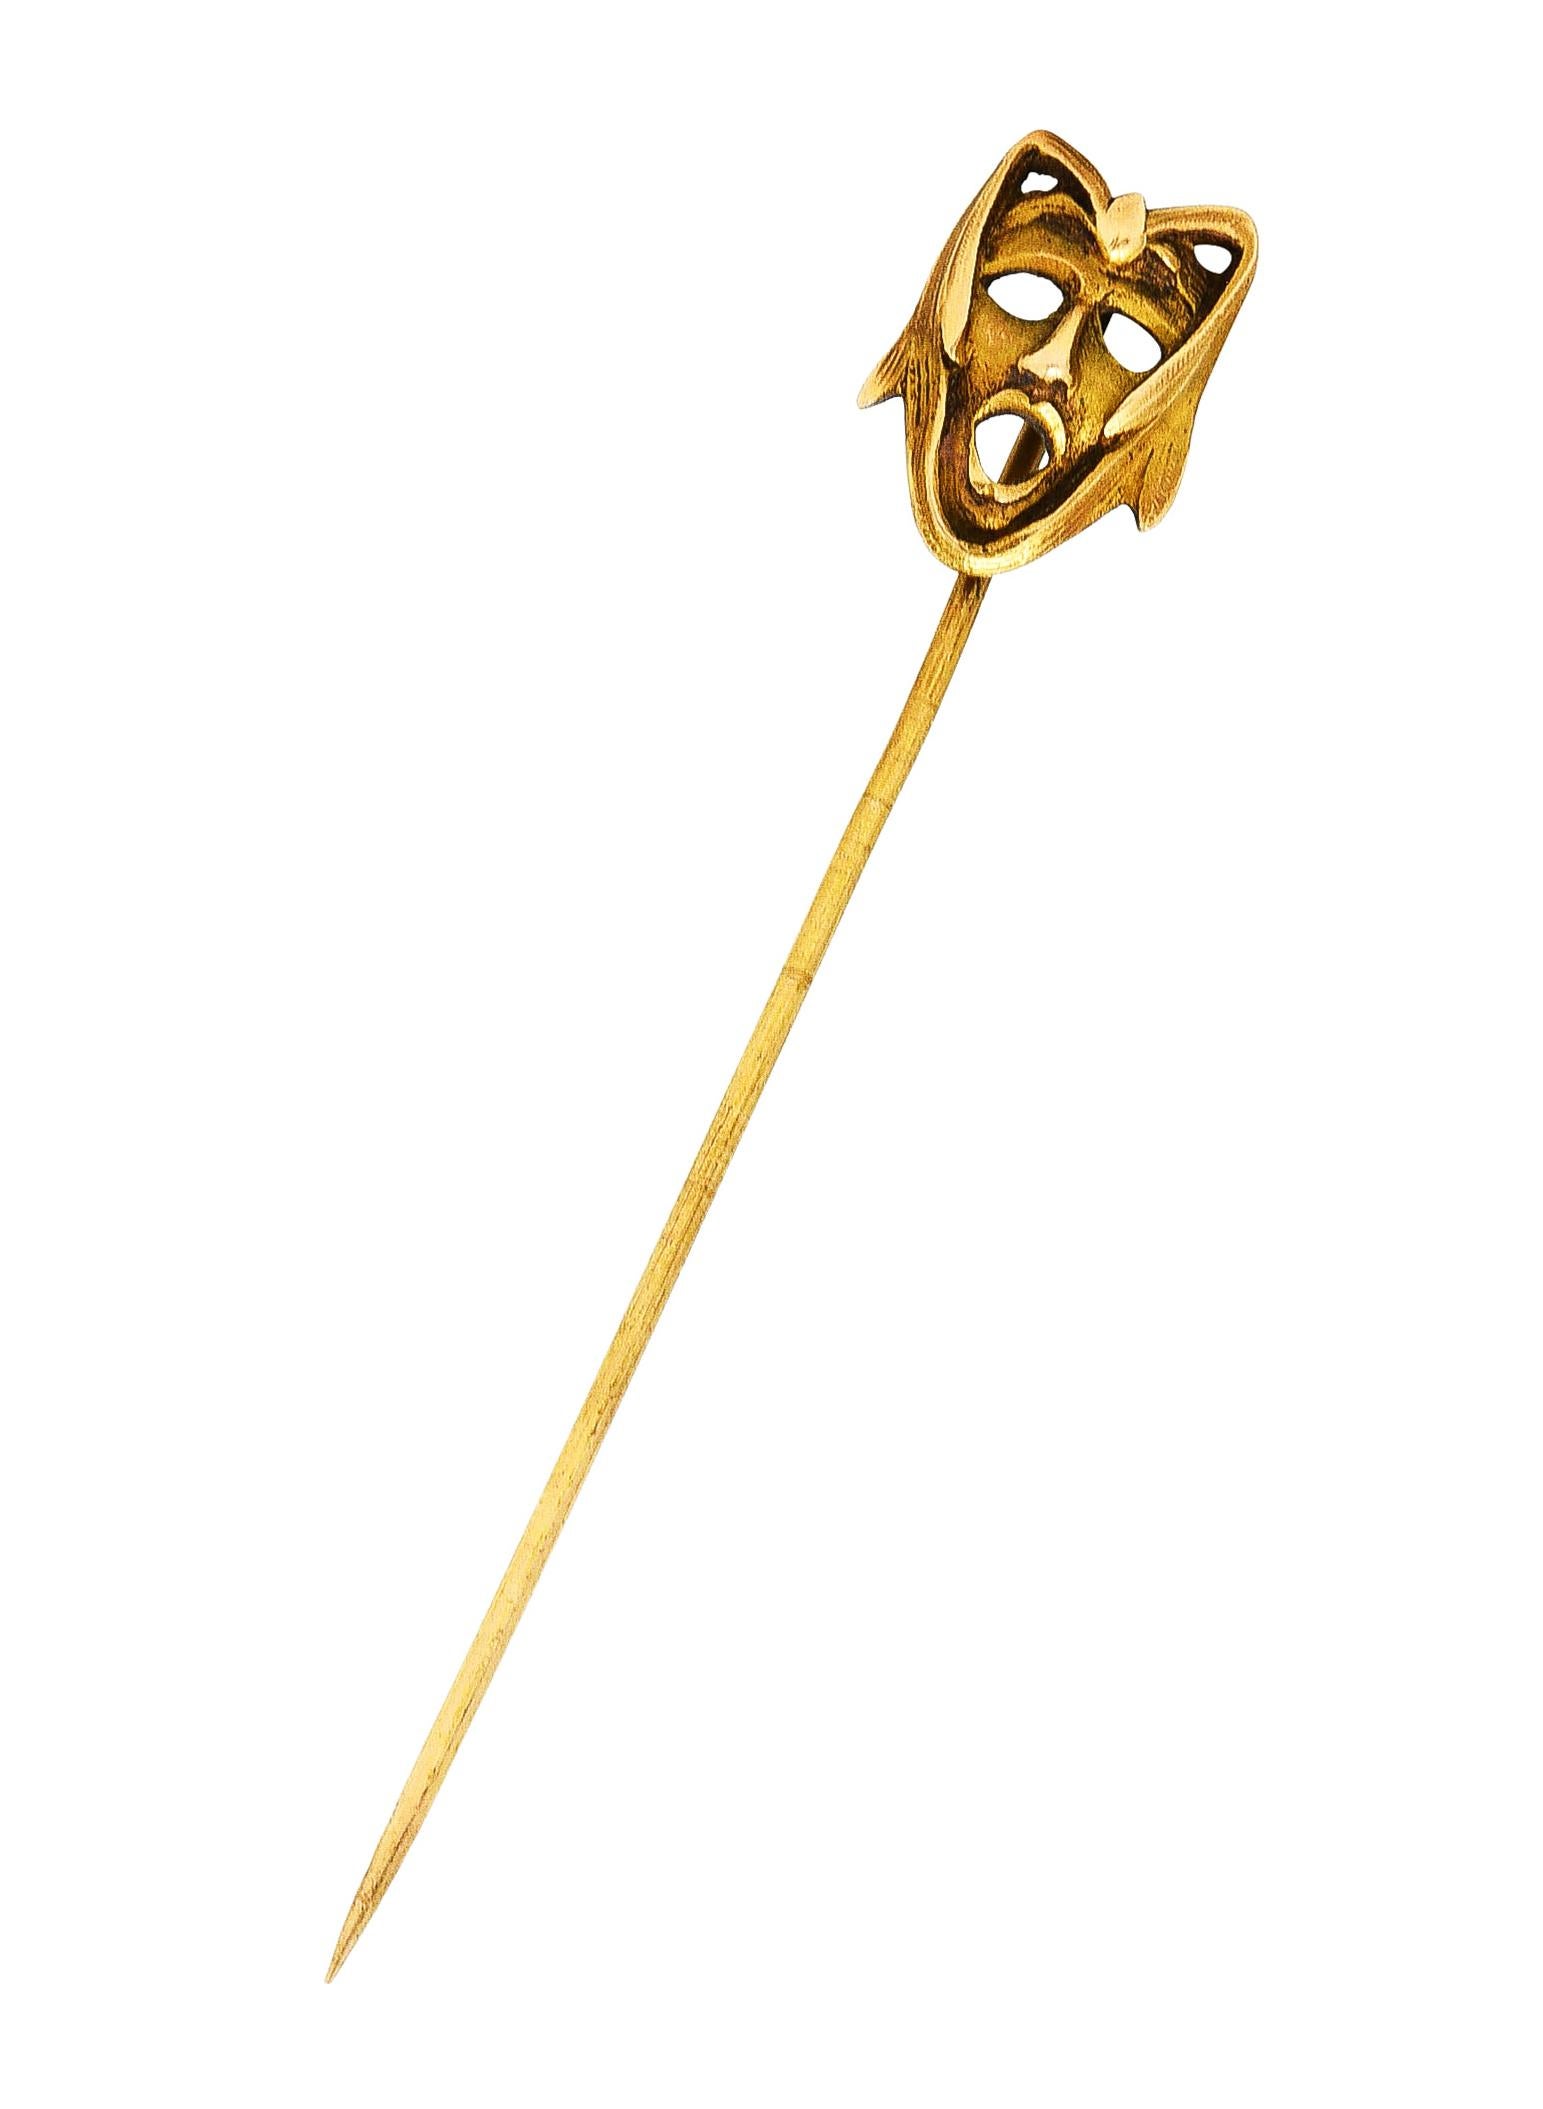 Stickpin is designed as stylized mask of Green Man figure

With expressive features and leafy fronds framing face

Completed by pinstem

Tested as 14 karat gold

Circa: 1905

Head measures: 1/2 x 11/16 inch

Total length: 2 7/8 inches

Total weight: